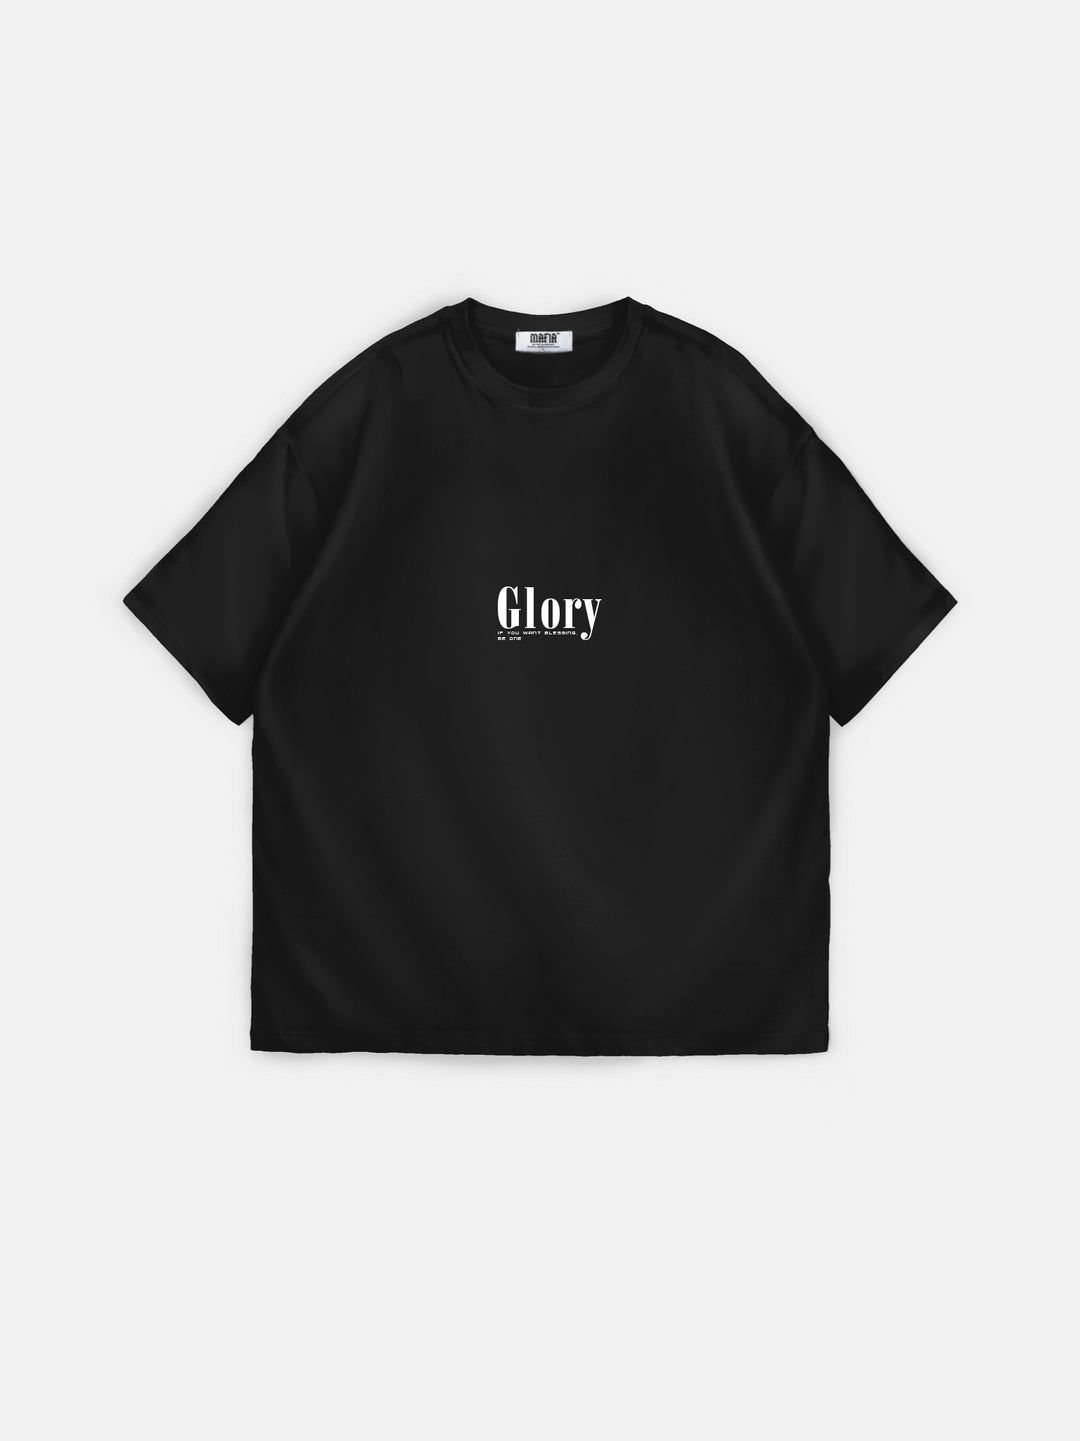 Oversize Glory T-shirt - Black and Red